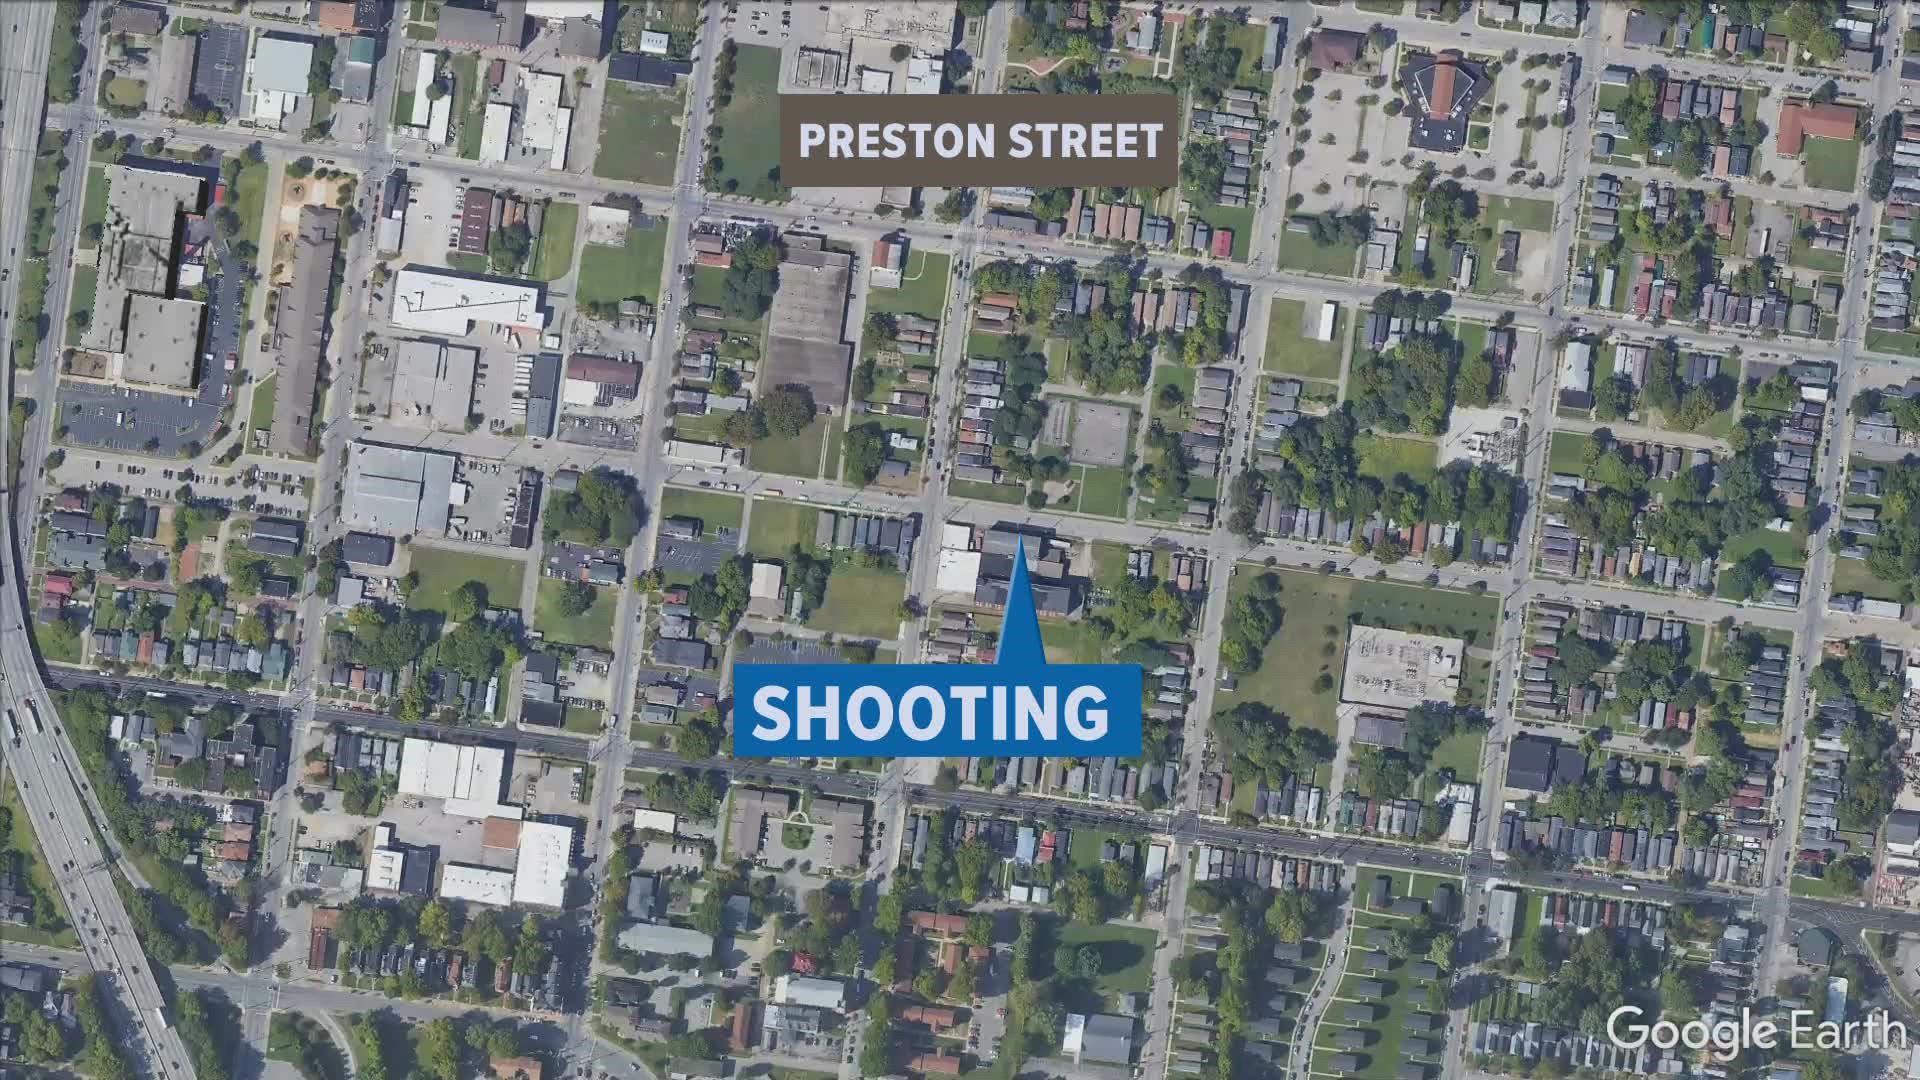 Tuesday night, a teen male walked into UofL Hospital with a gunshot wound, around the same time officers responded to reports of gunfire on Caldwell Street.